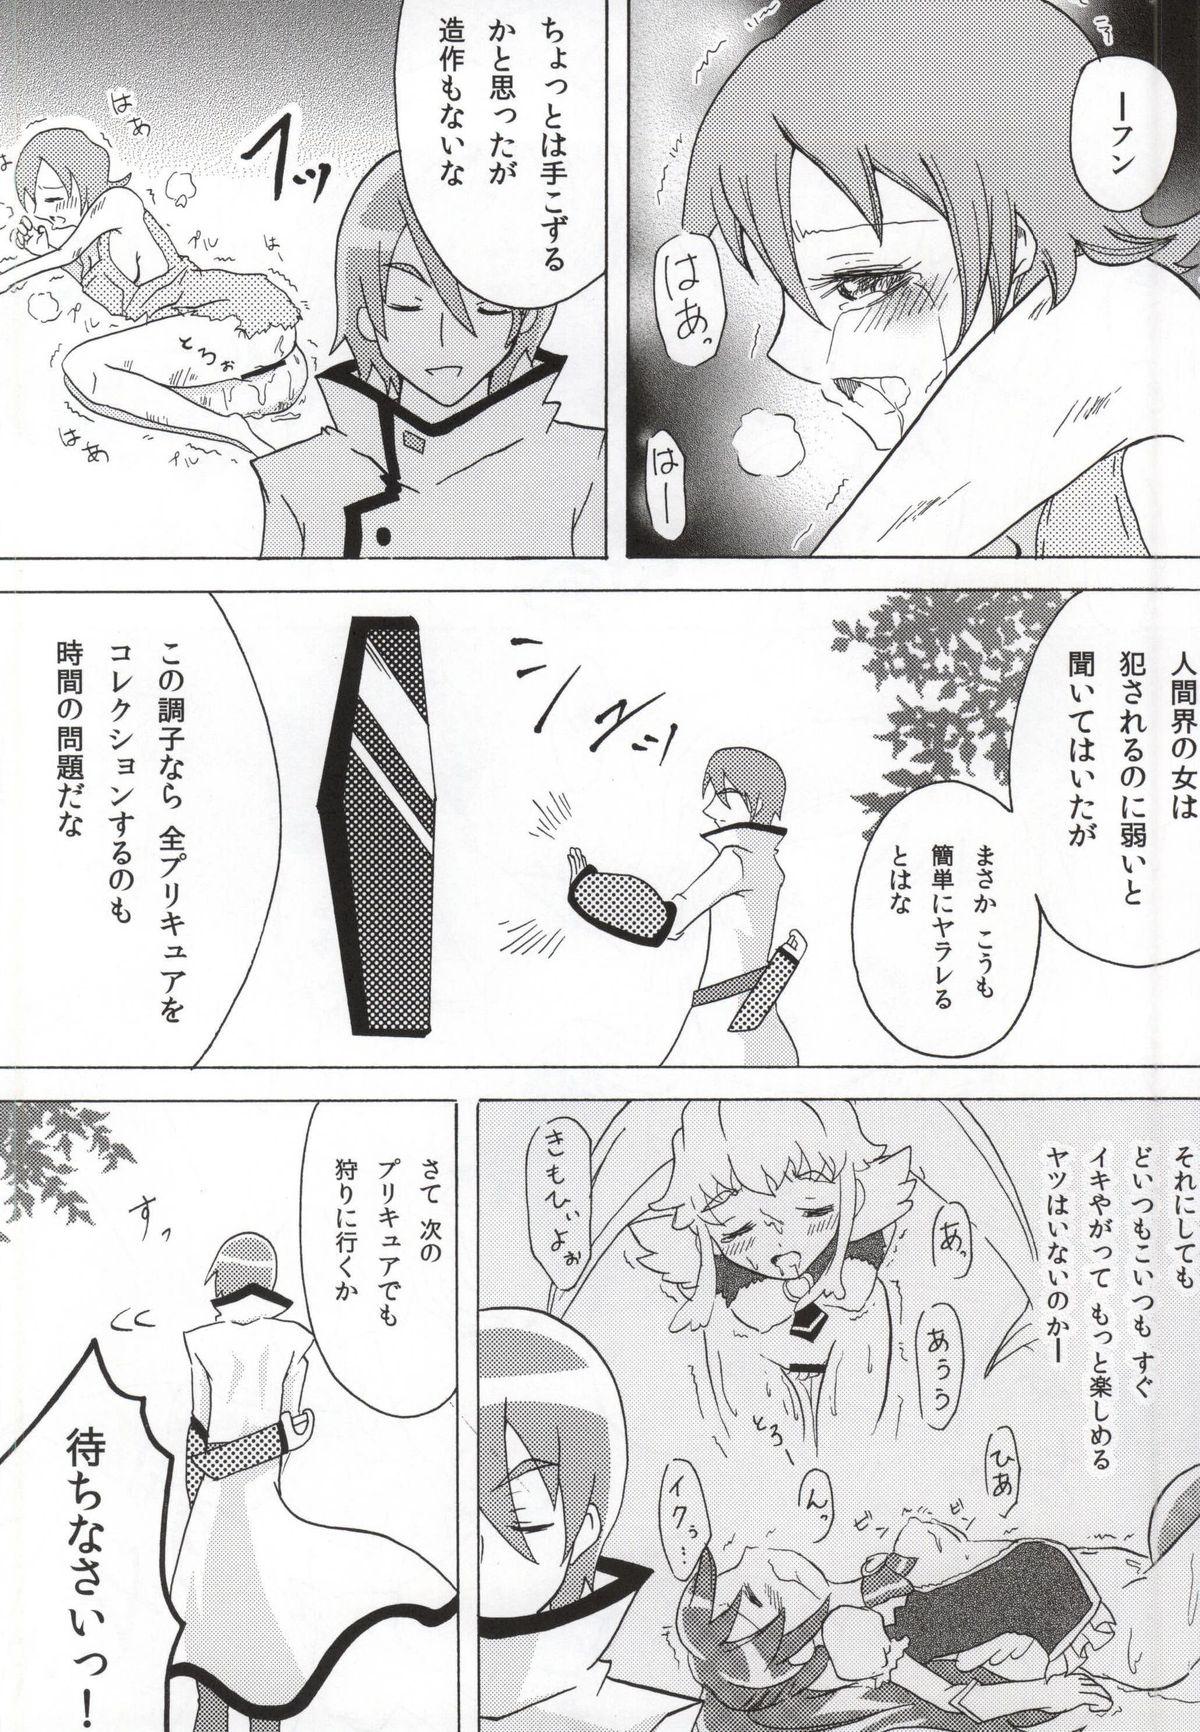 Assfucking Precure Hunt - Happinesscharge precure Nice - Page 3